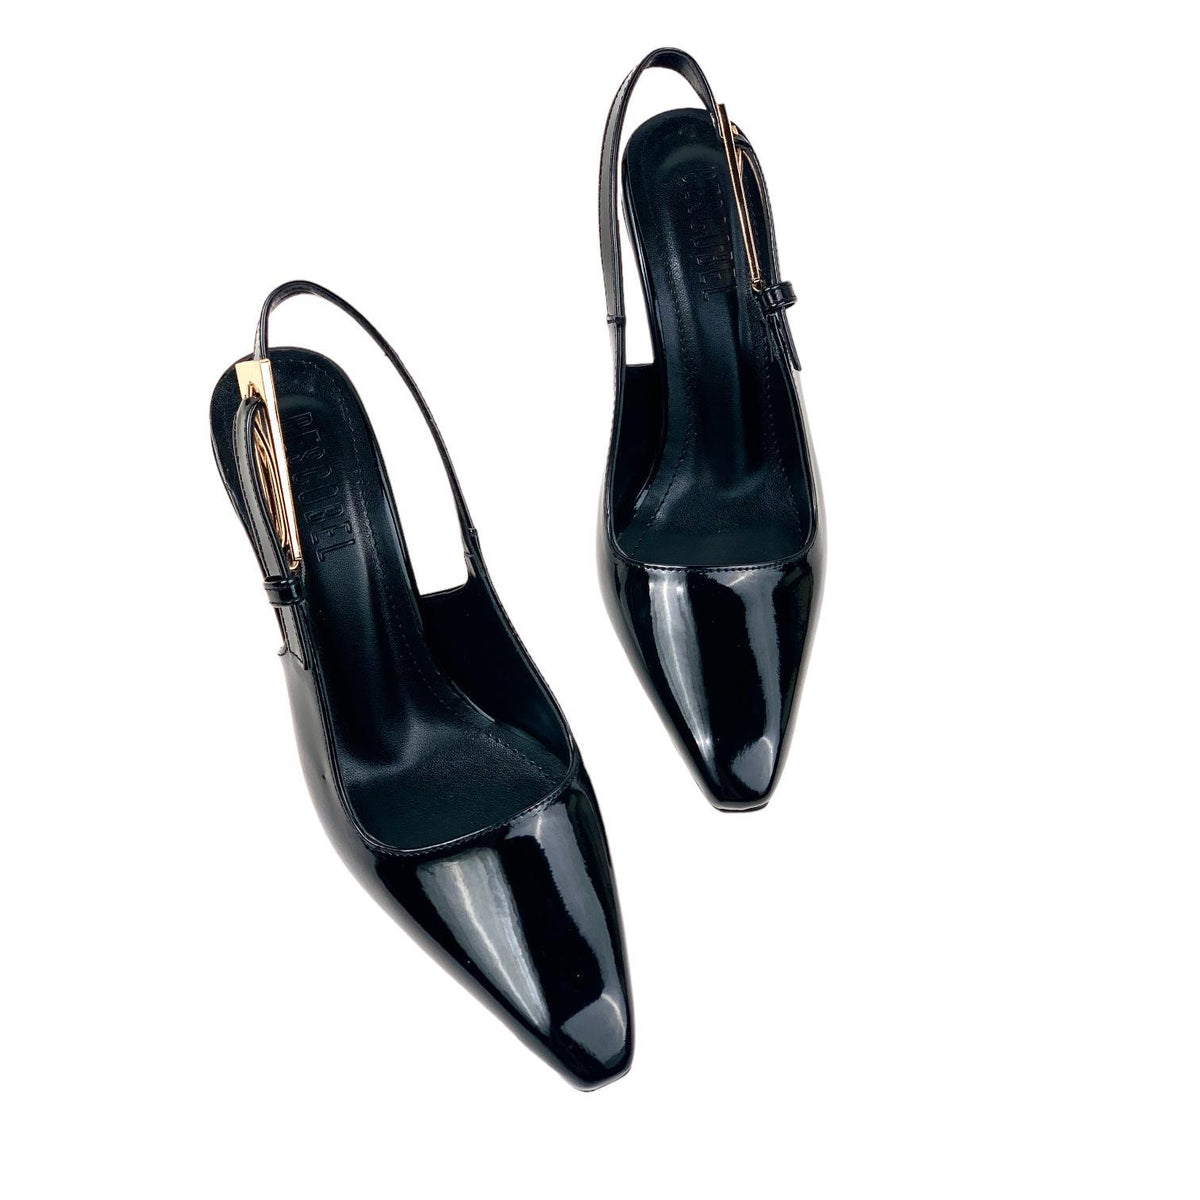 Women's Lery Black Patent Leather Heeled Shoes 9 cm - STREETMODE ™